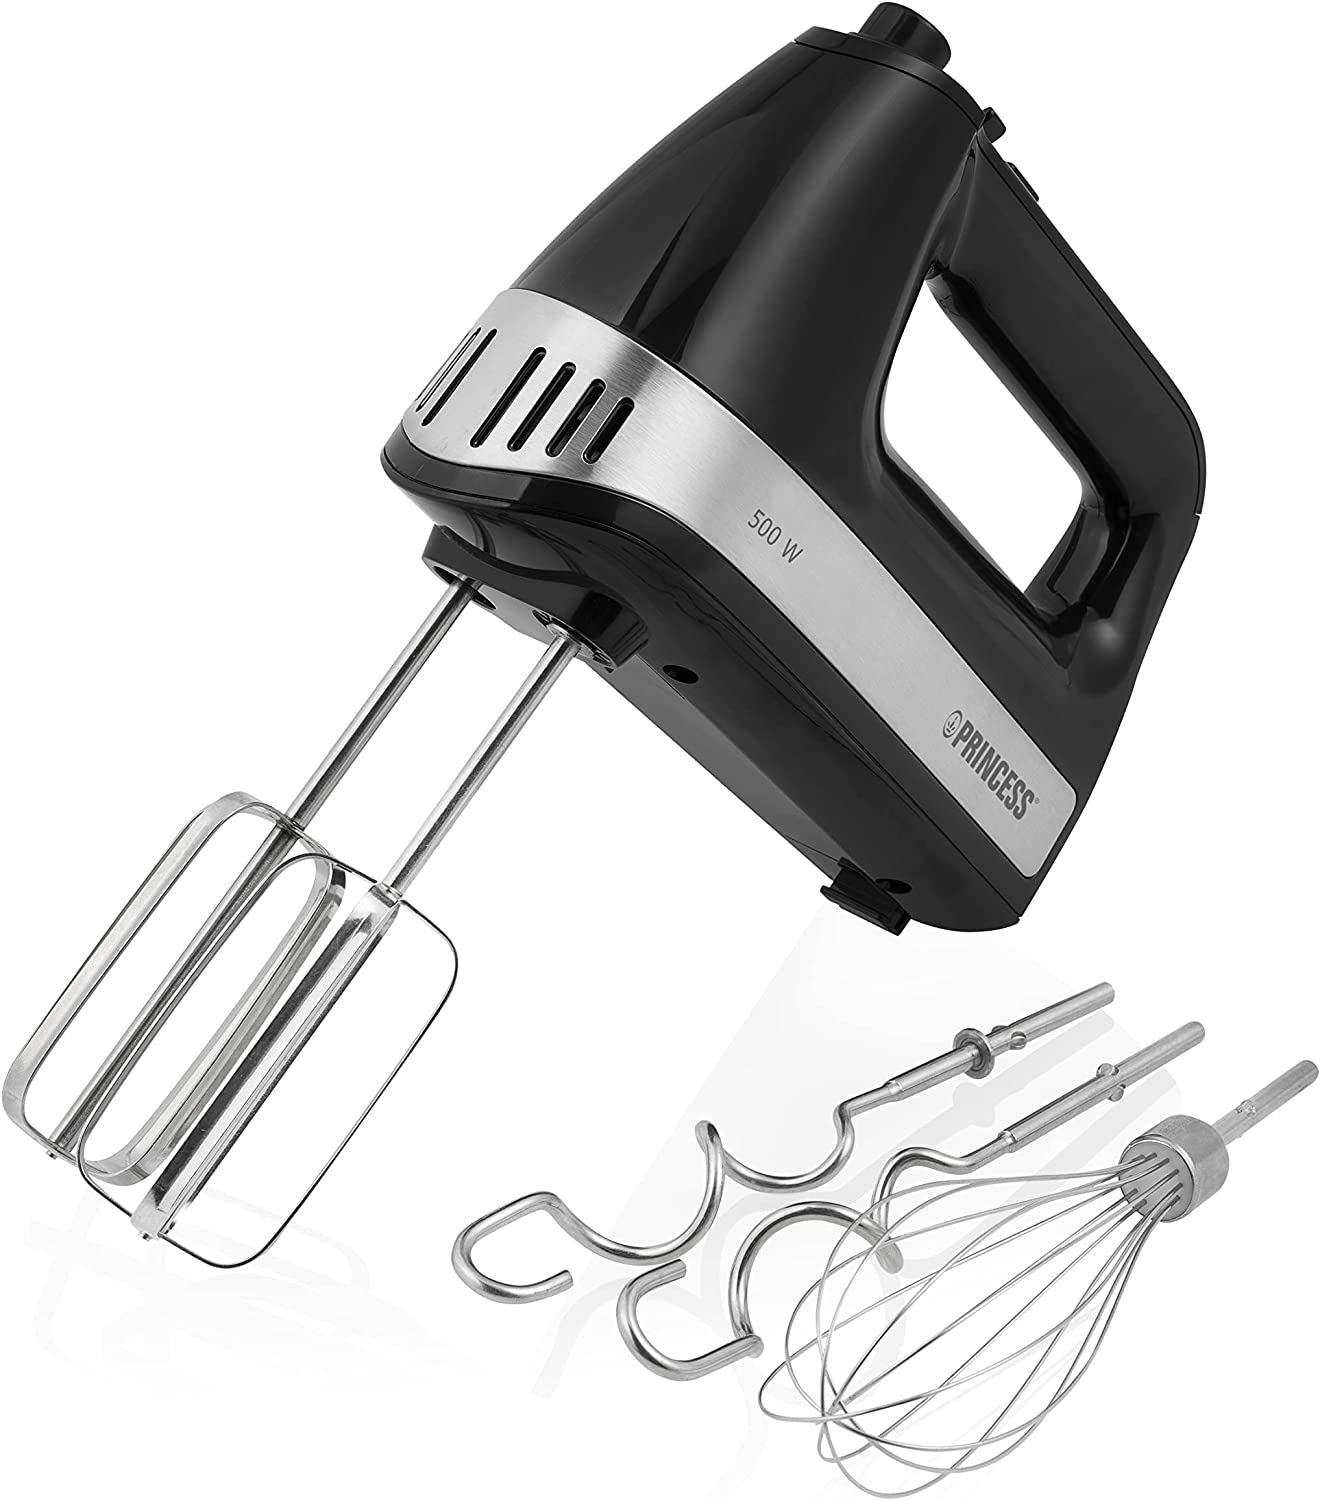 Princess Power 500 Hand Mixer - 3 Mixing Attachments, 5 Mixing Speeds, 500 Watt, with Storage Box, 22206, 01.22206.01.001, Black, Silver